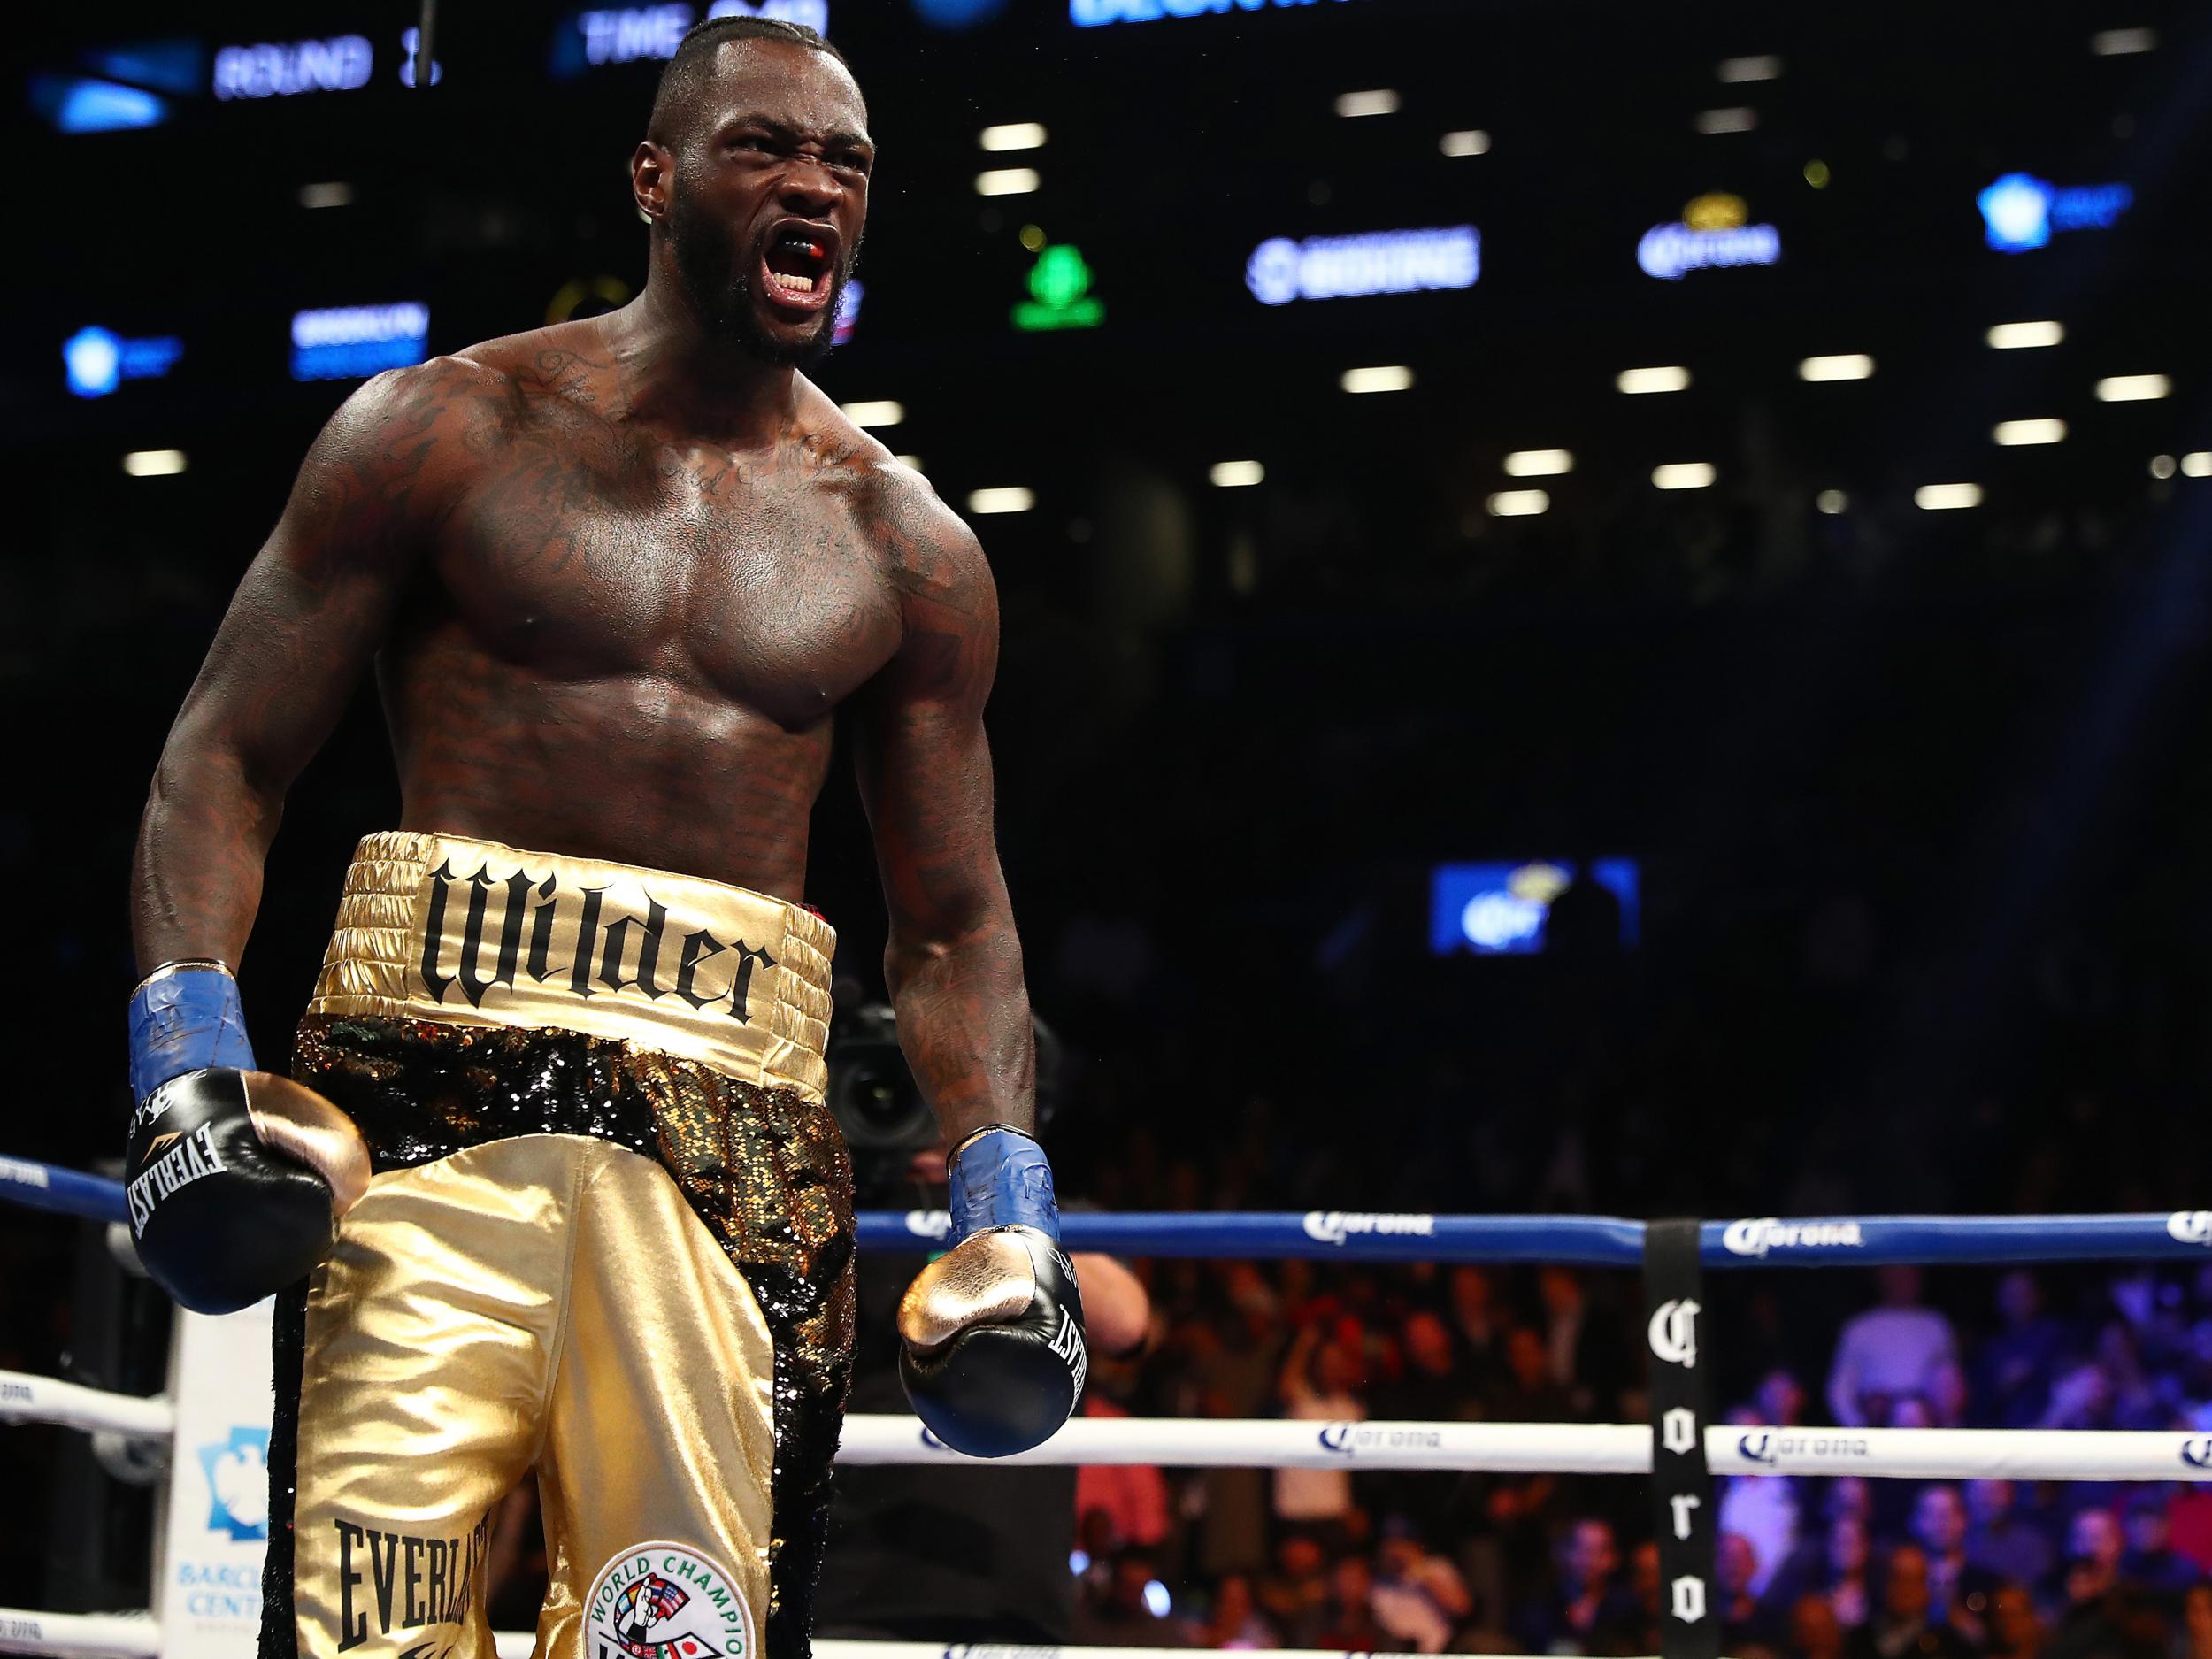 Wilder ruled out a fight with Dillian Whyte